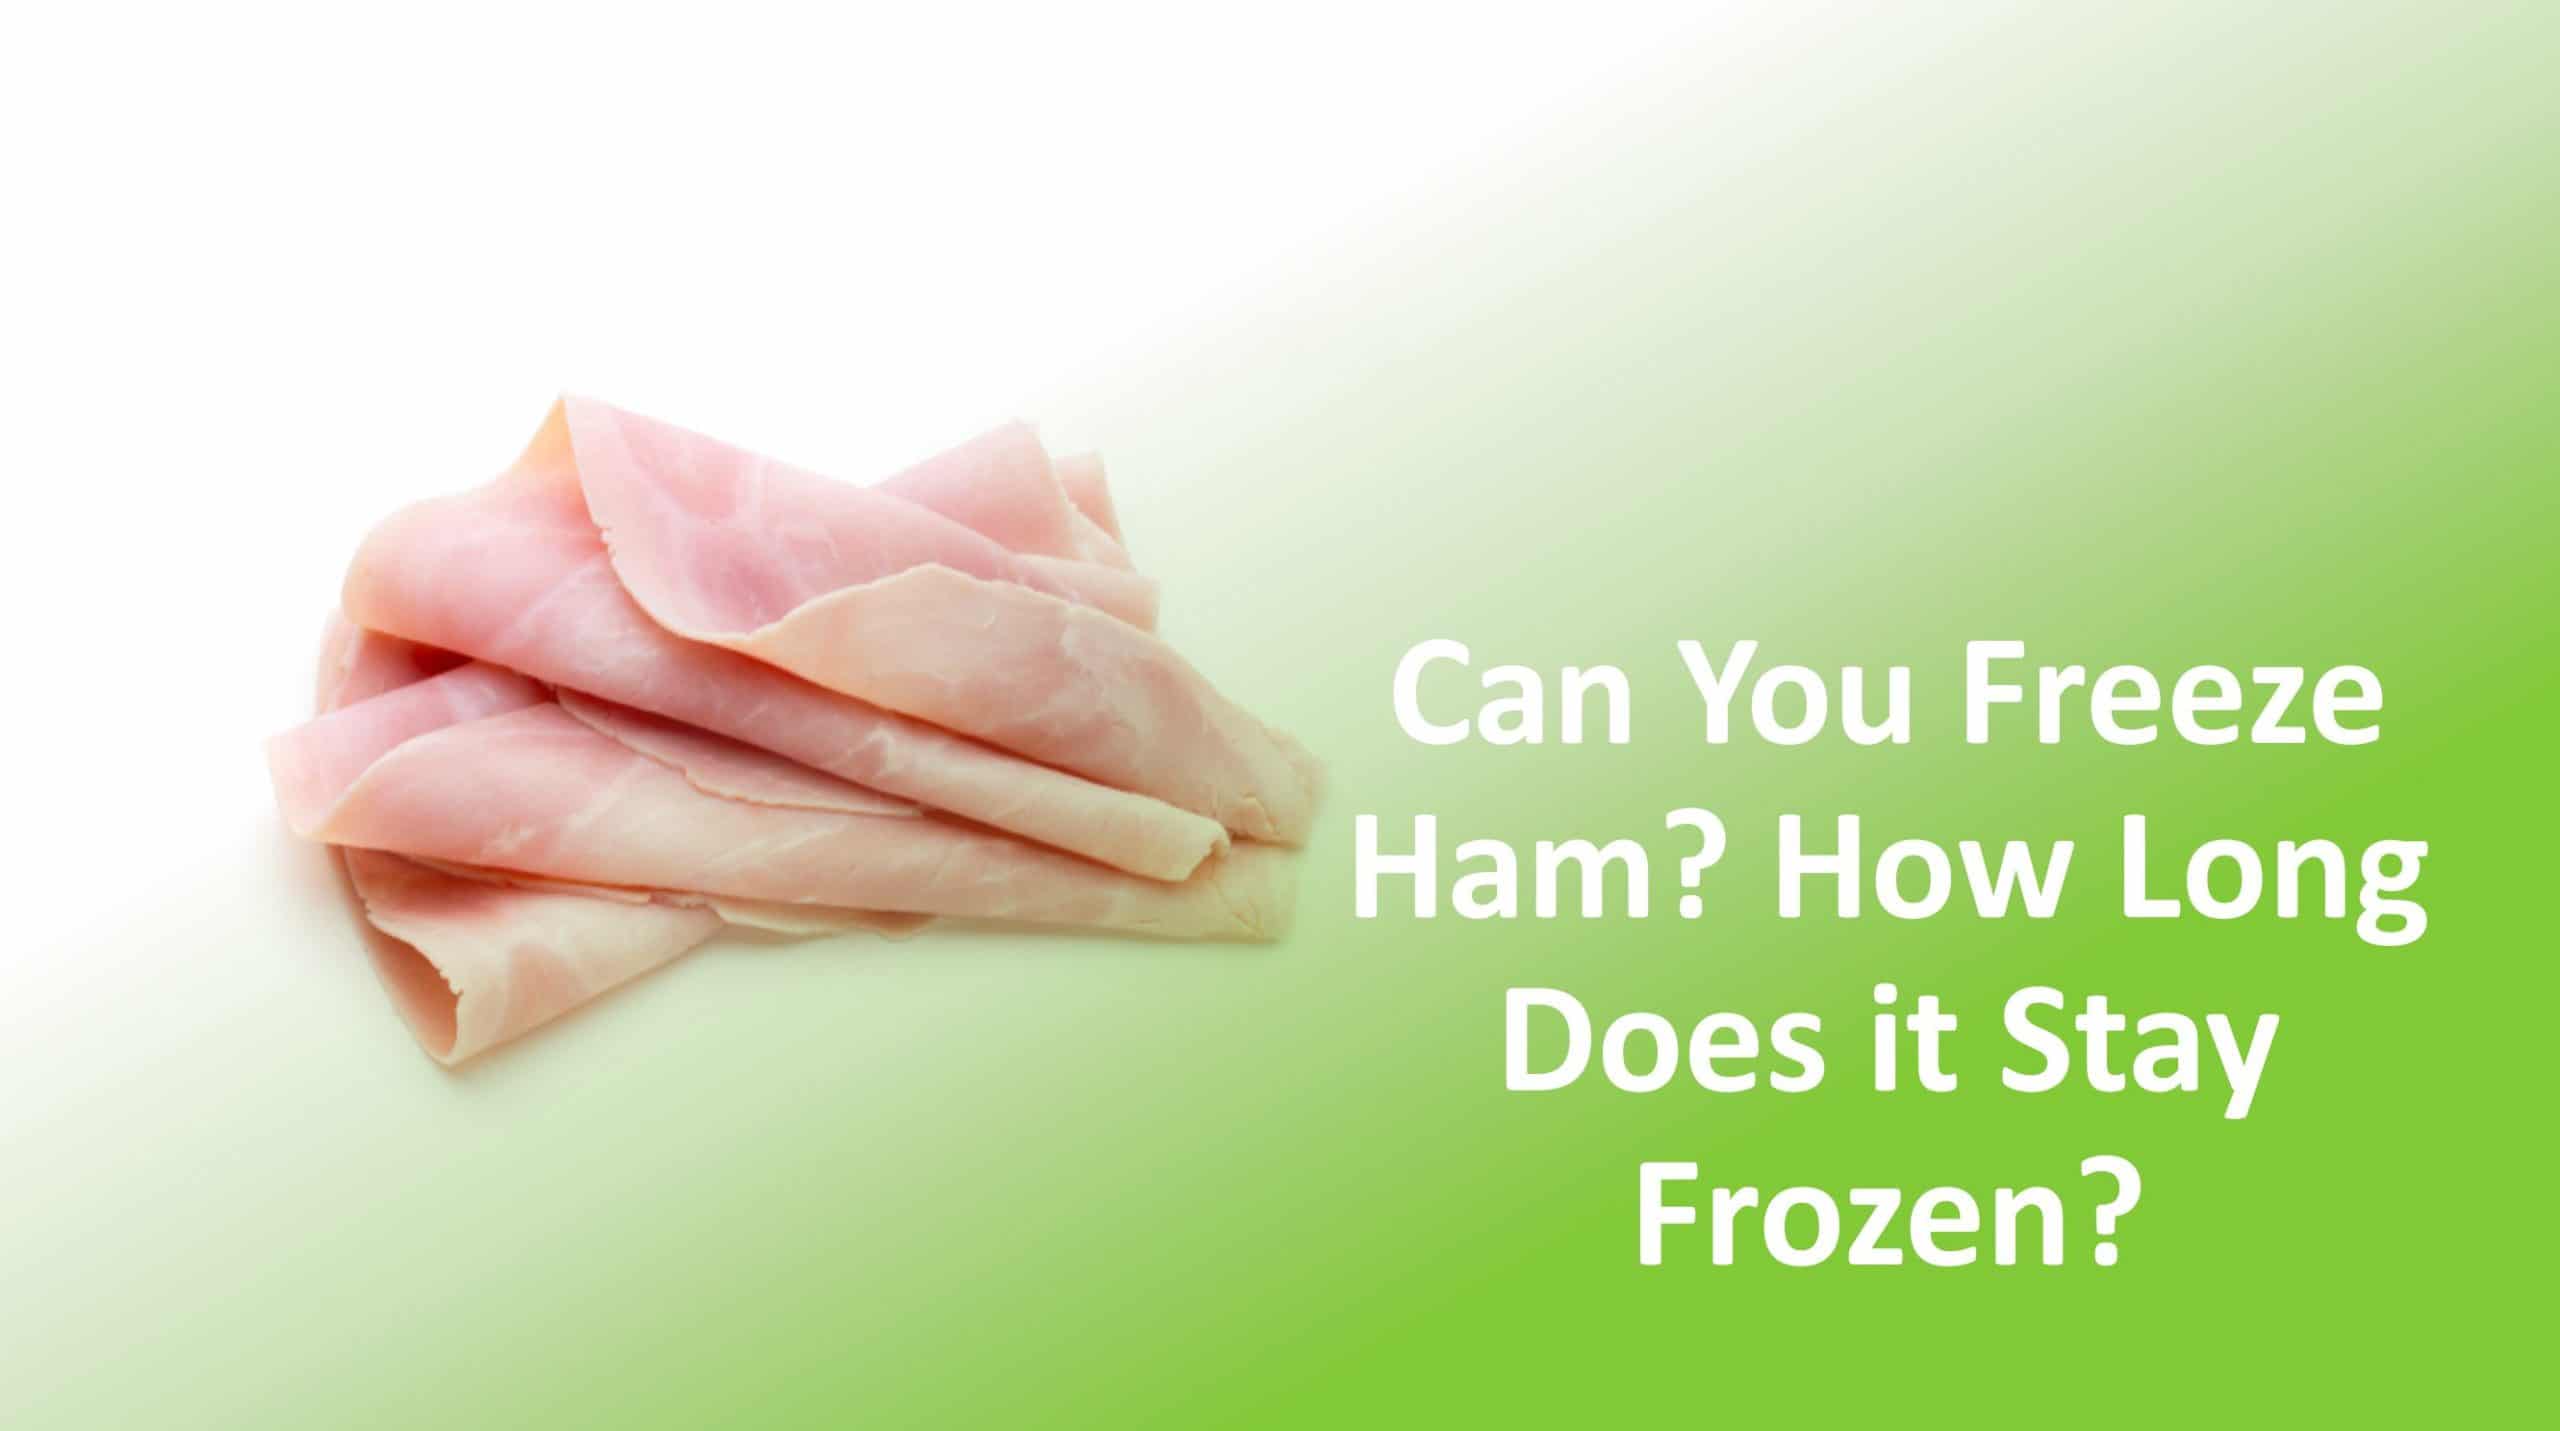 Can You Freeze Ham? How Long Does It Stay Frozen?